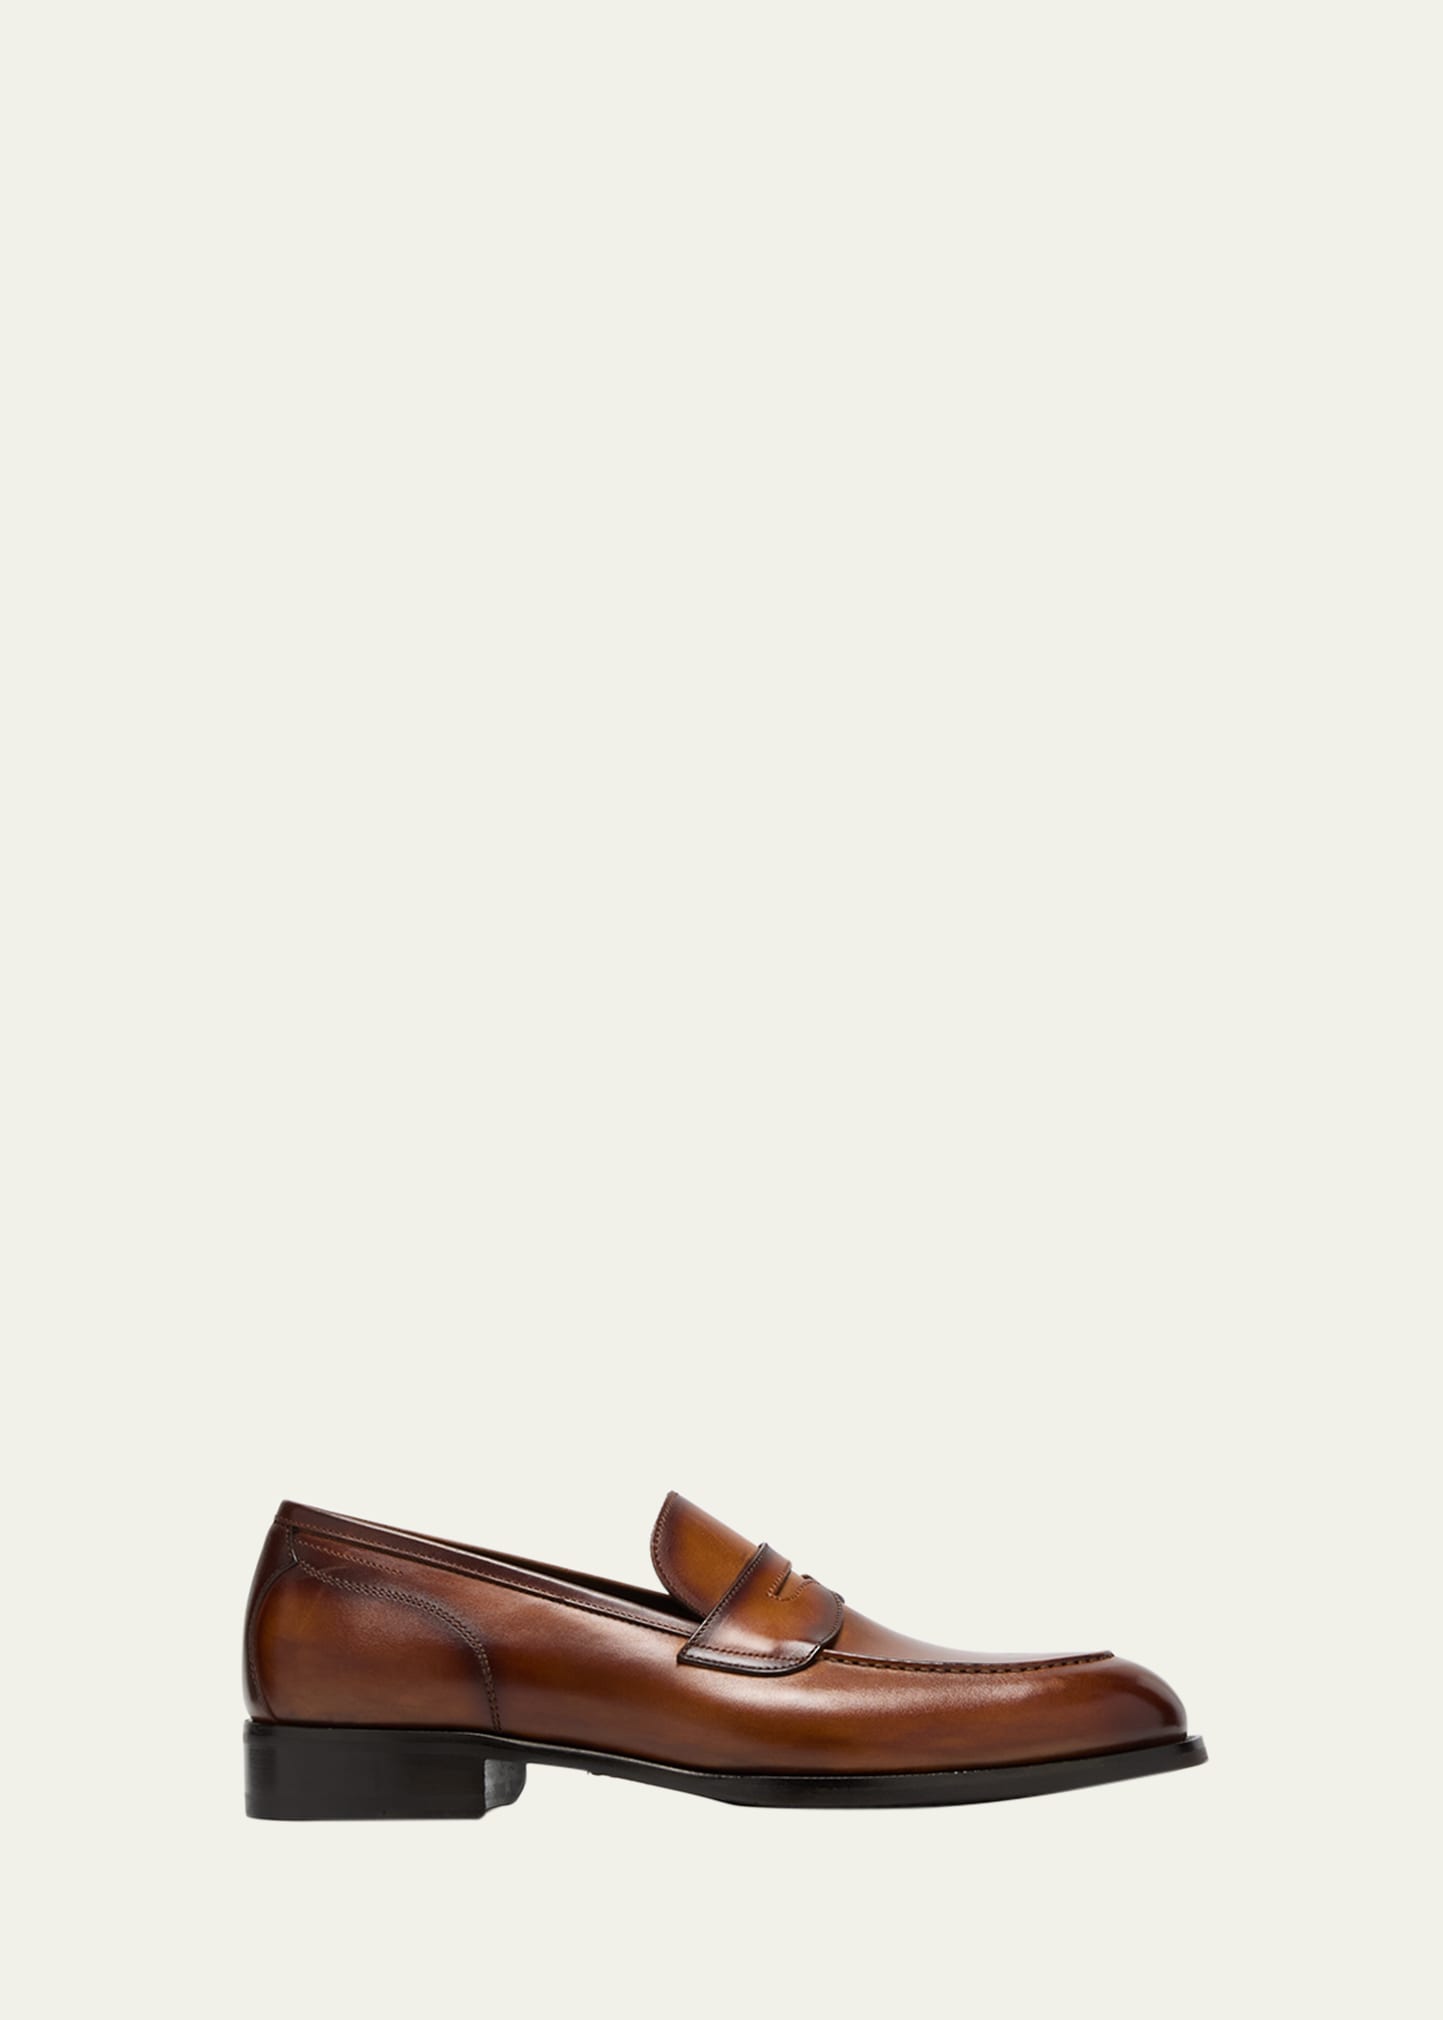 Di Bianco Men's Miseno Calf Leather Penny Loafers In Wood